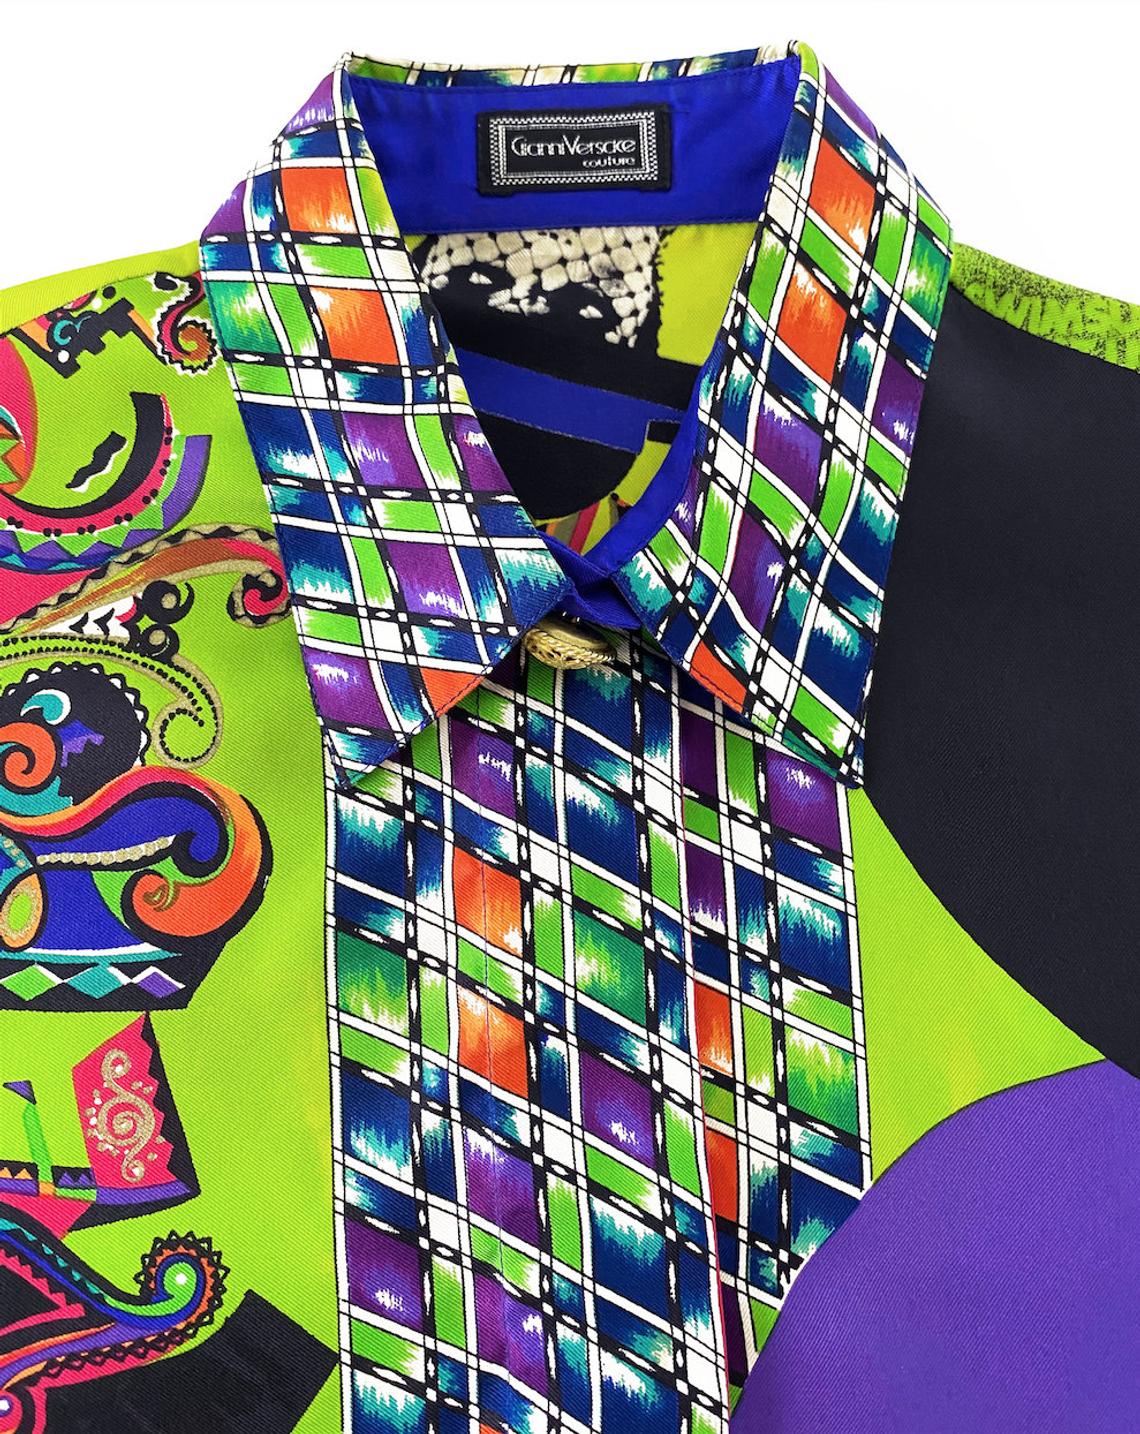 FRUIT Vintage Gianni Versace rare Vogue print silk shirt from the Spring 1991 collection. This is a very special, museum worthy piece! It features the iconic Vogue print in large scale all over and gold feature buttons on collar and cuff.